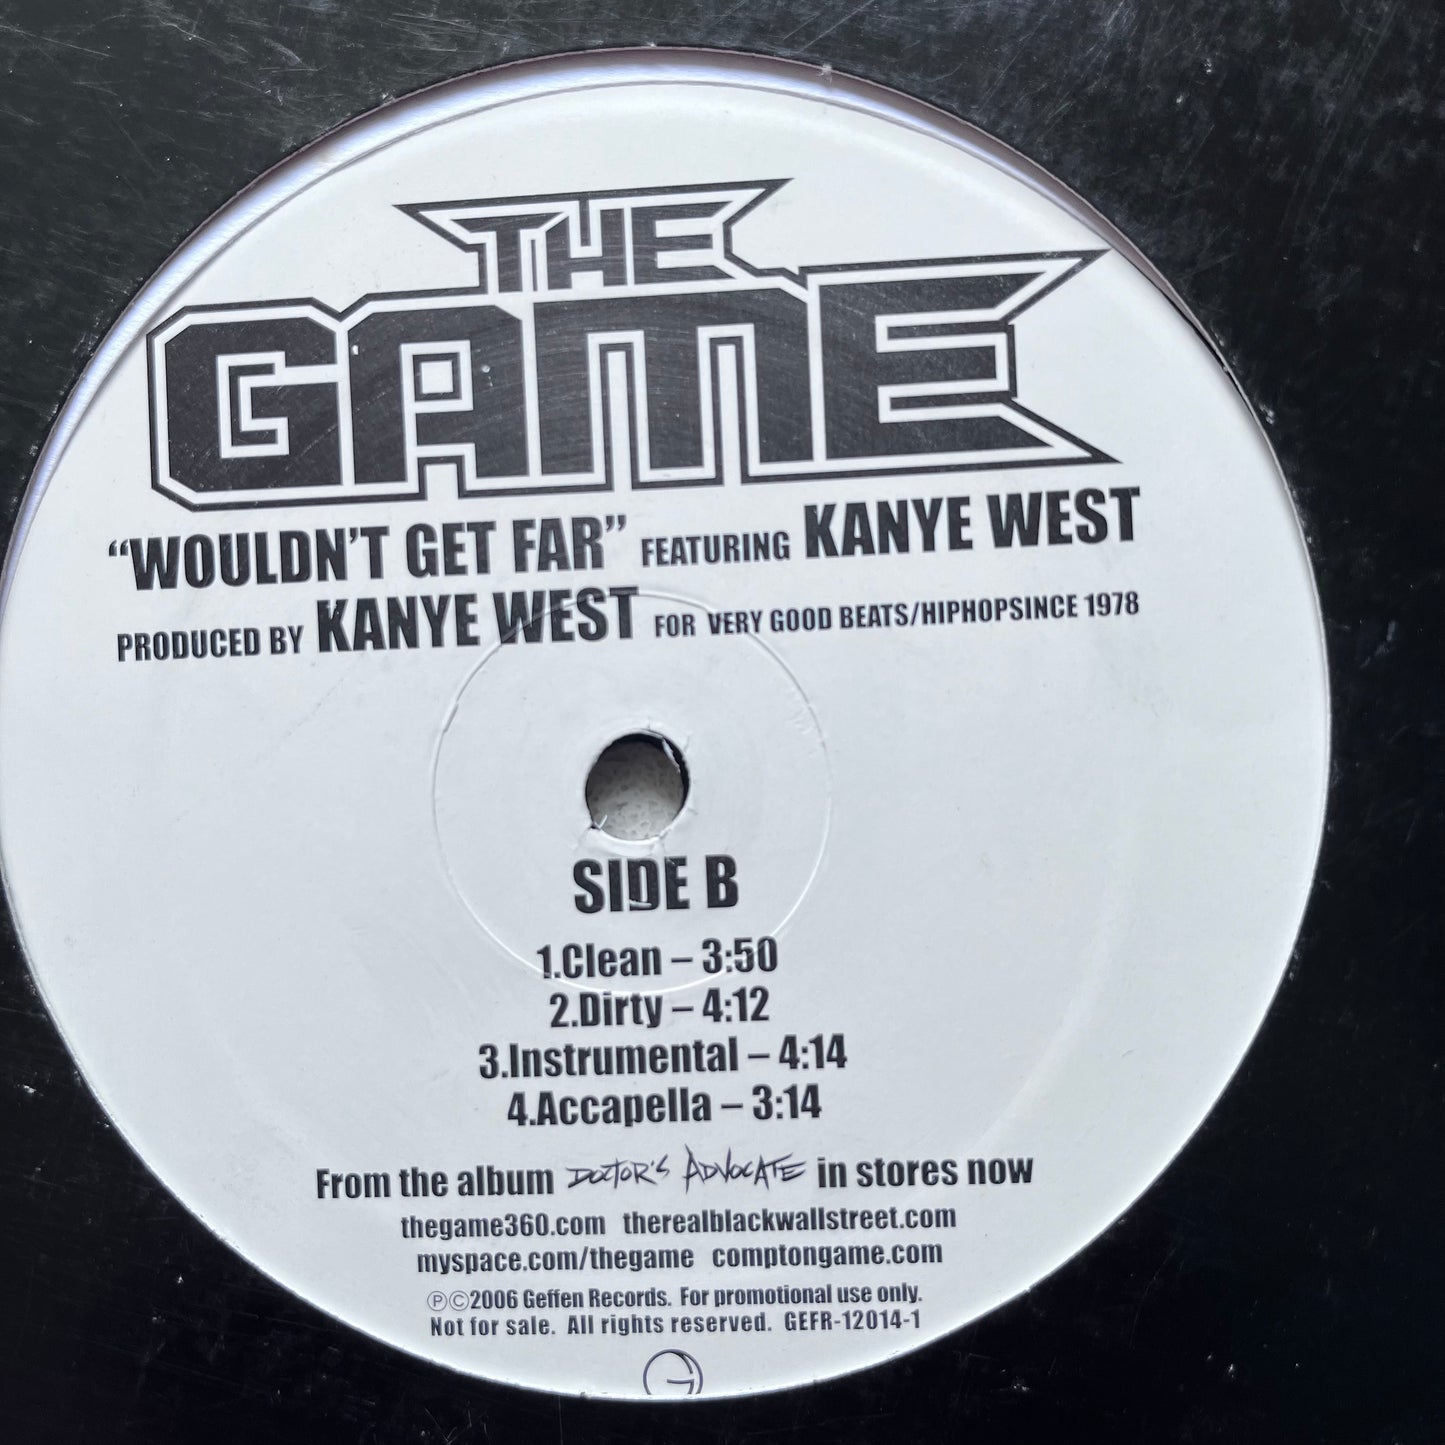 The Game Feat Kanye West “Wouldn’t Get Far” 8 Version 12inch Vinyl